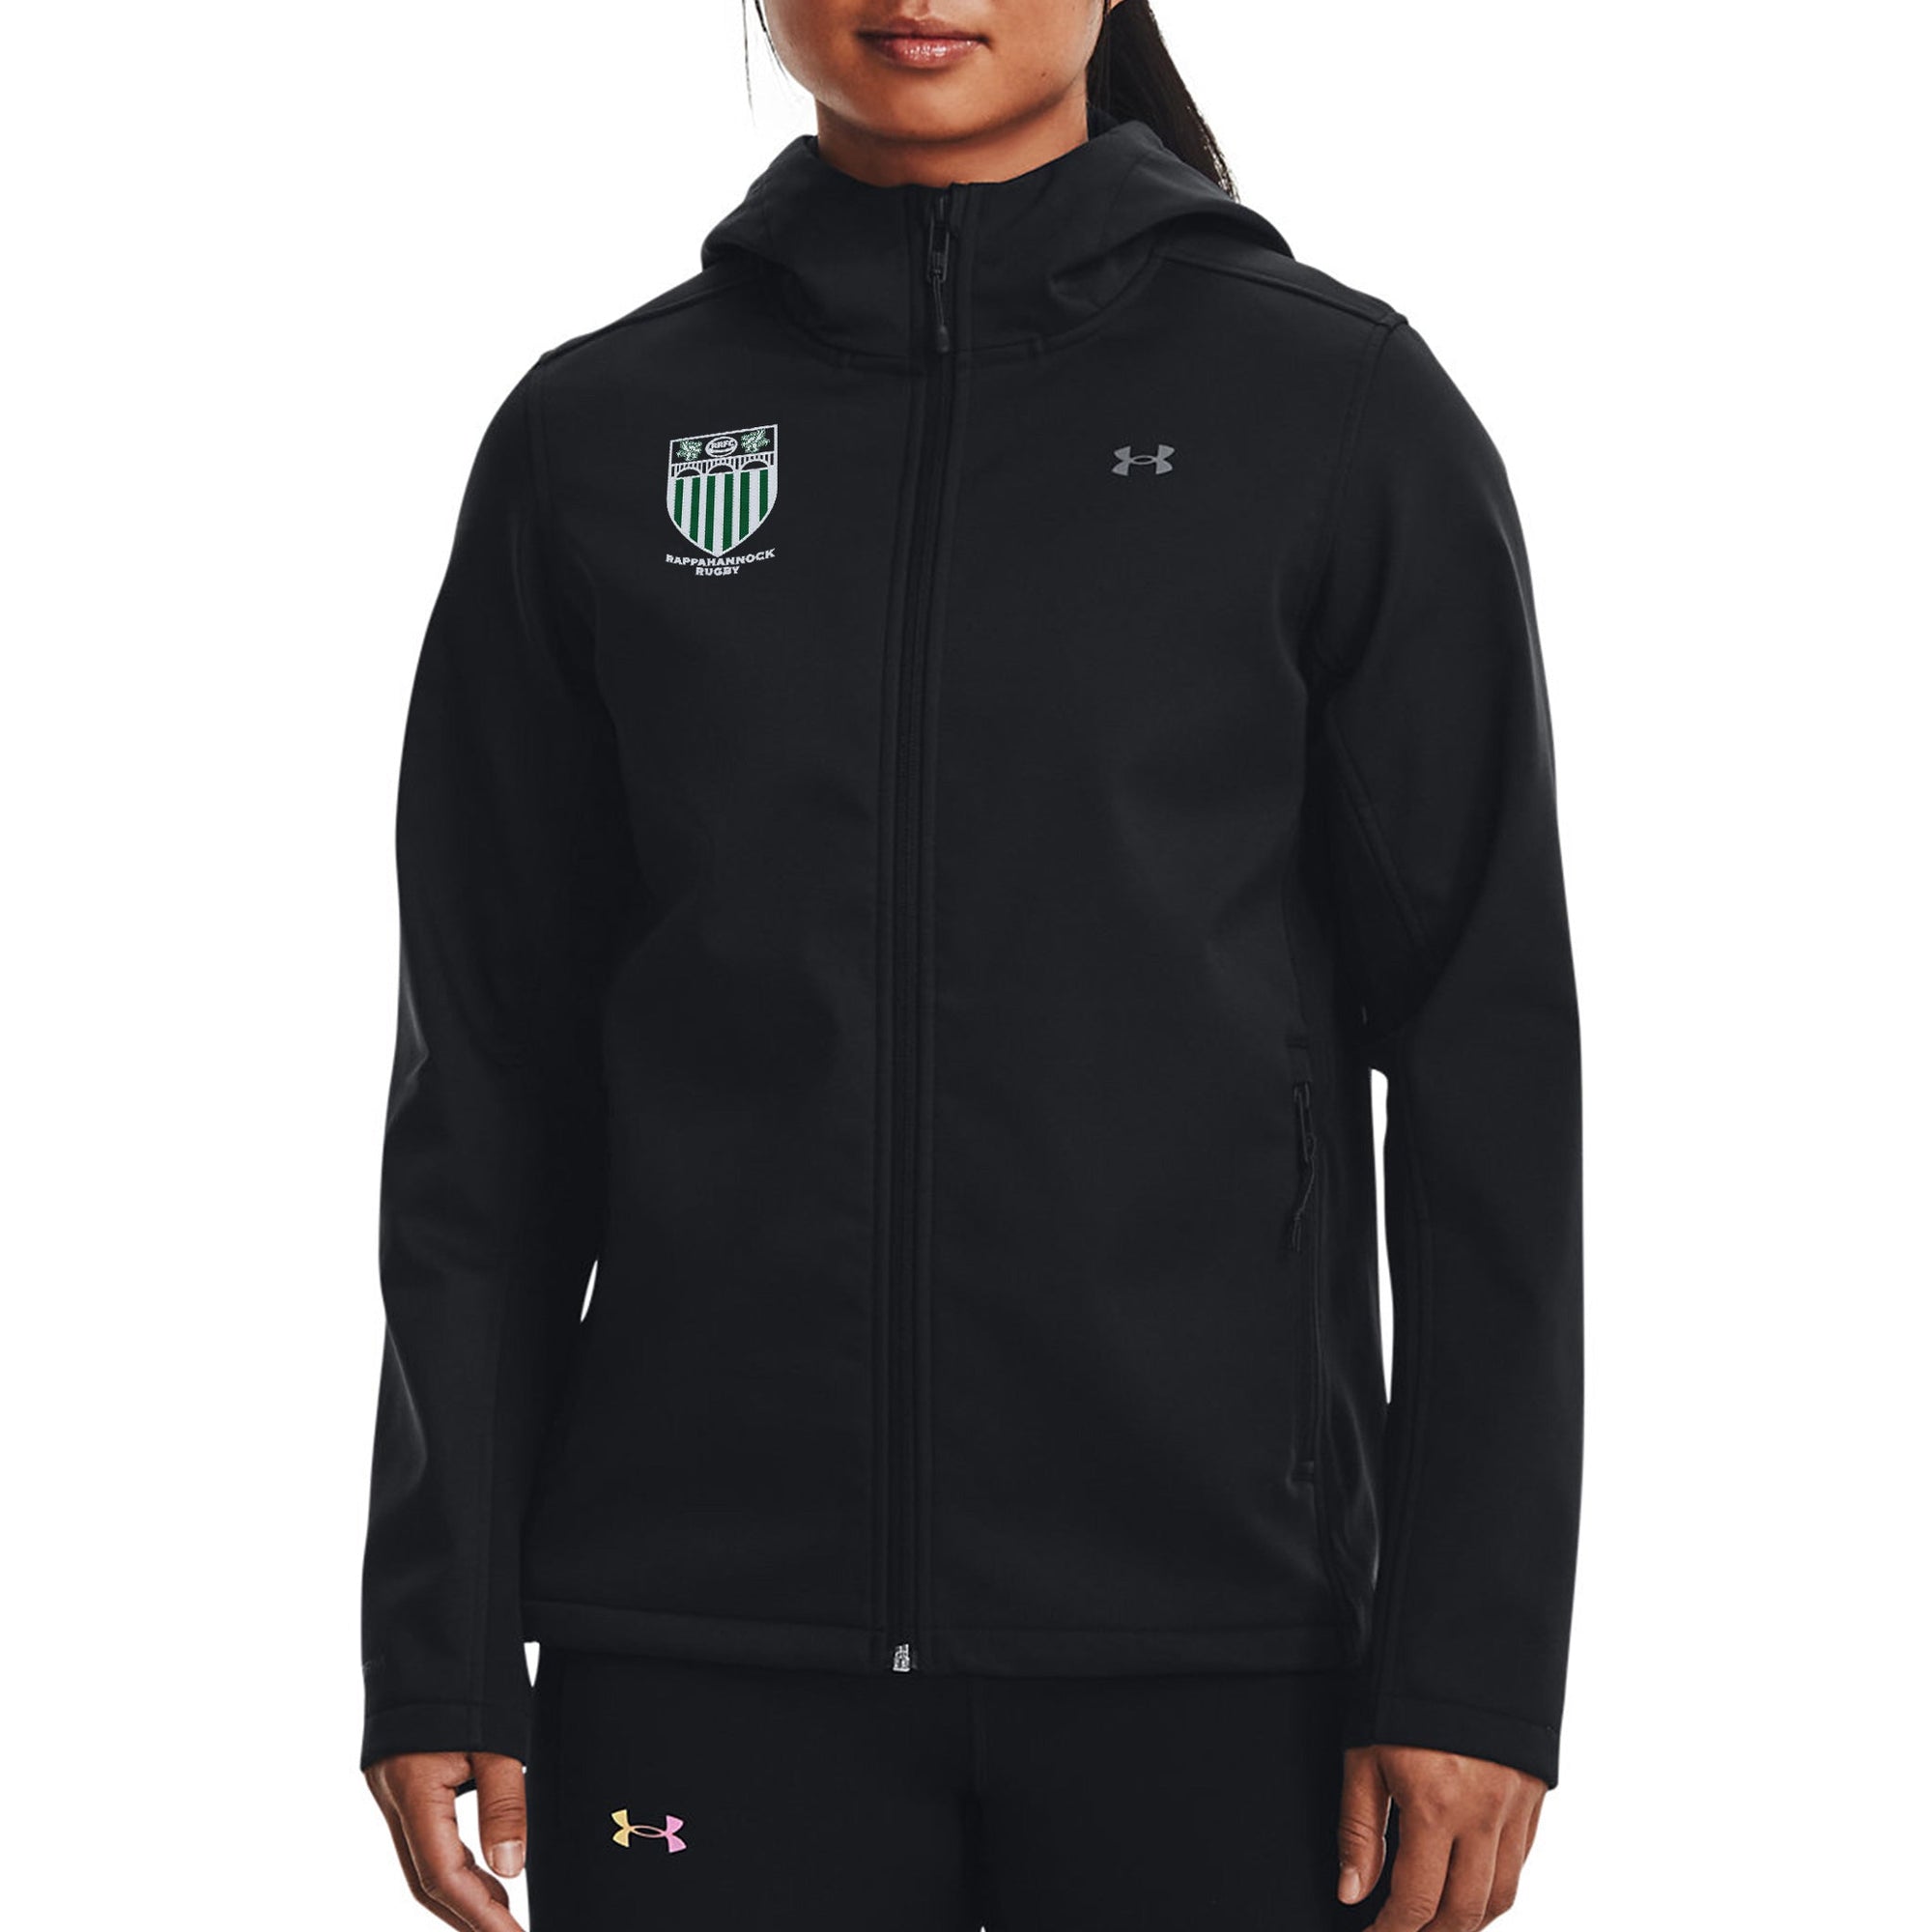 Rugby Imports Rappahannock RFC Women's Coldgear Hooded Infrared Jacket